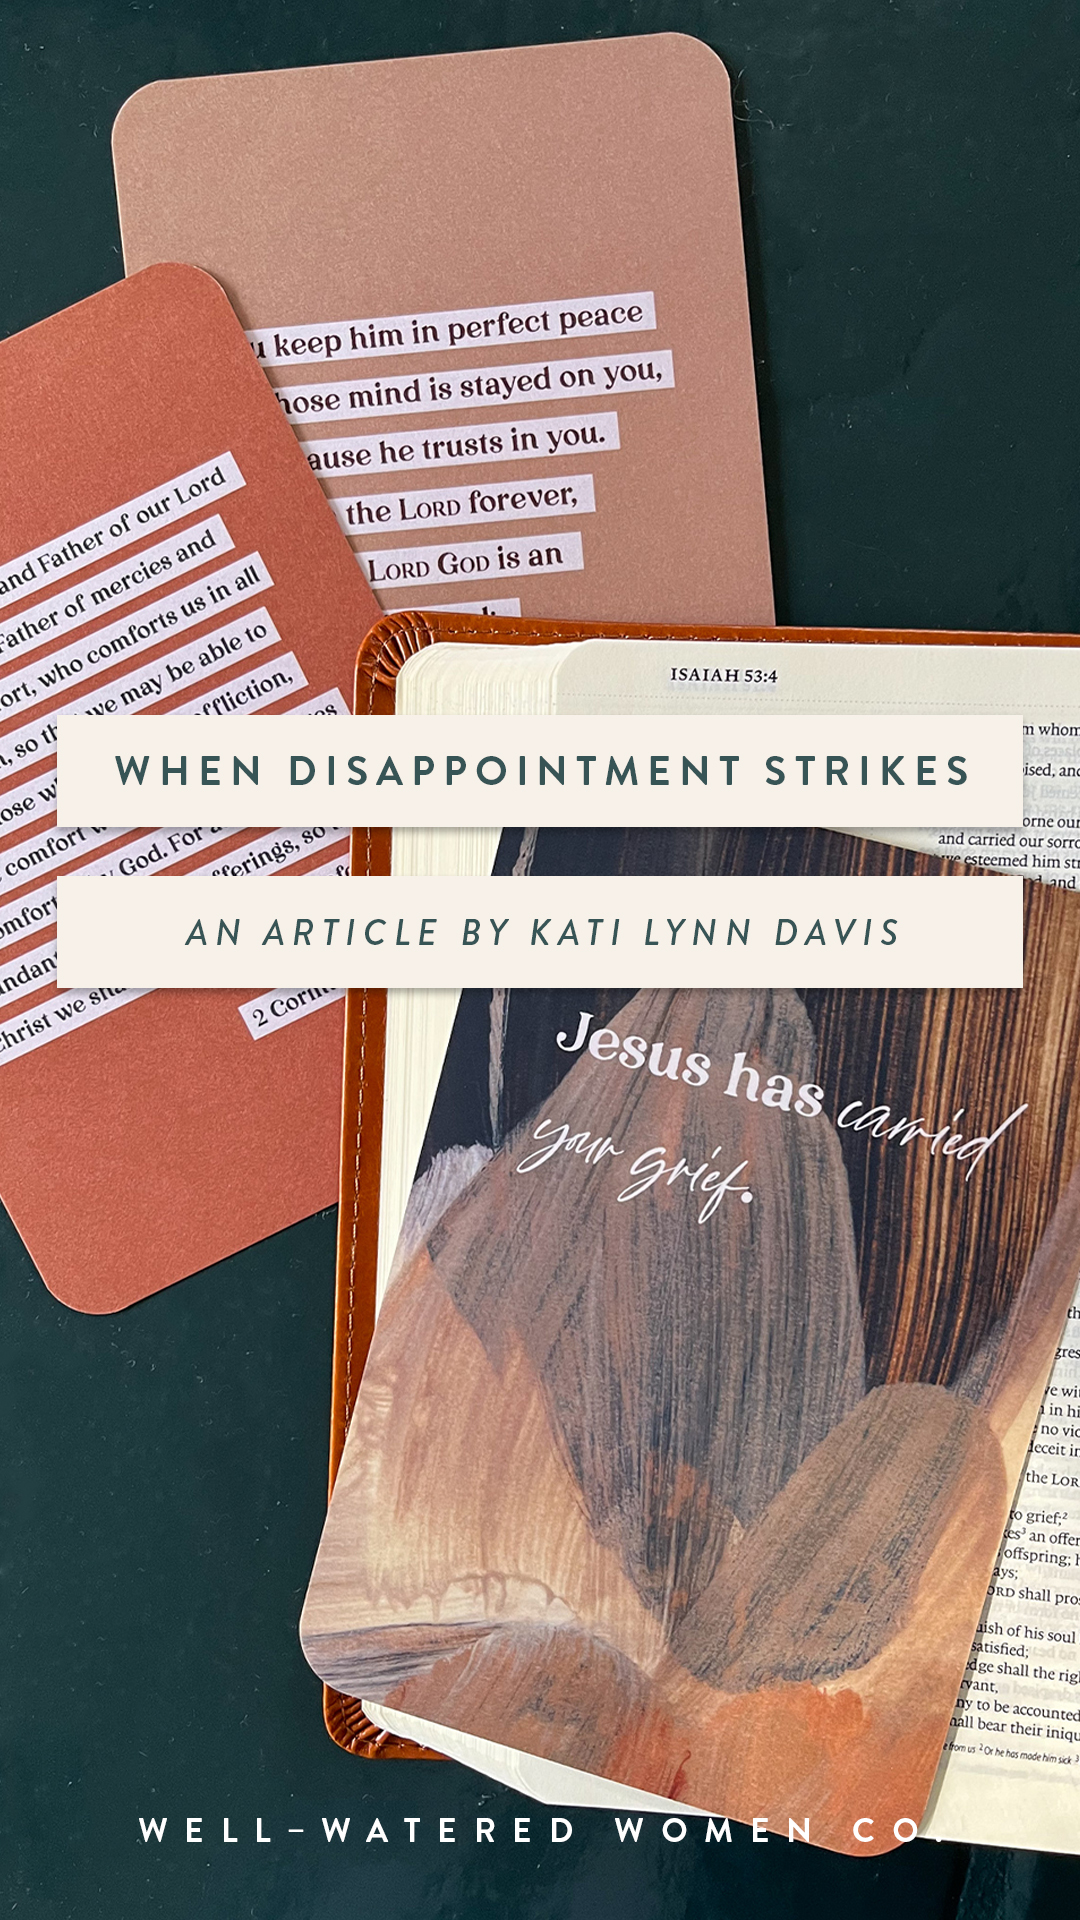 When Disappointment Strikes-an article from Well-Watered Women